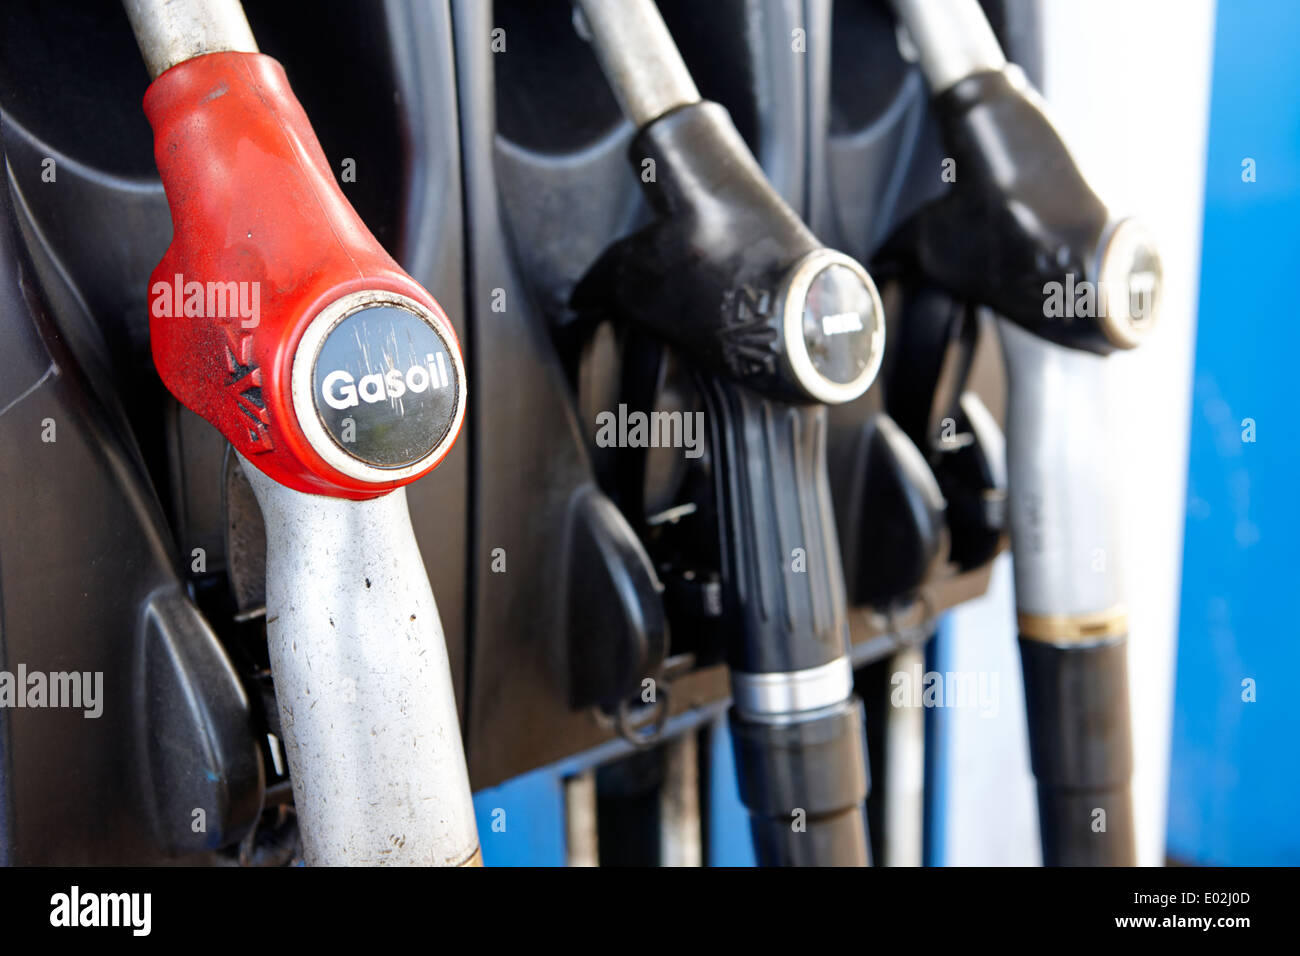 gas oil red diesel and high speed biofuel diesel pumps at a petrol station northern ireland Stock Photo